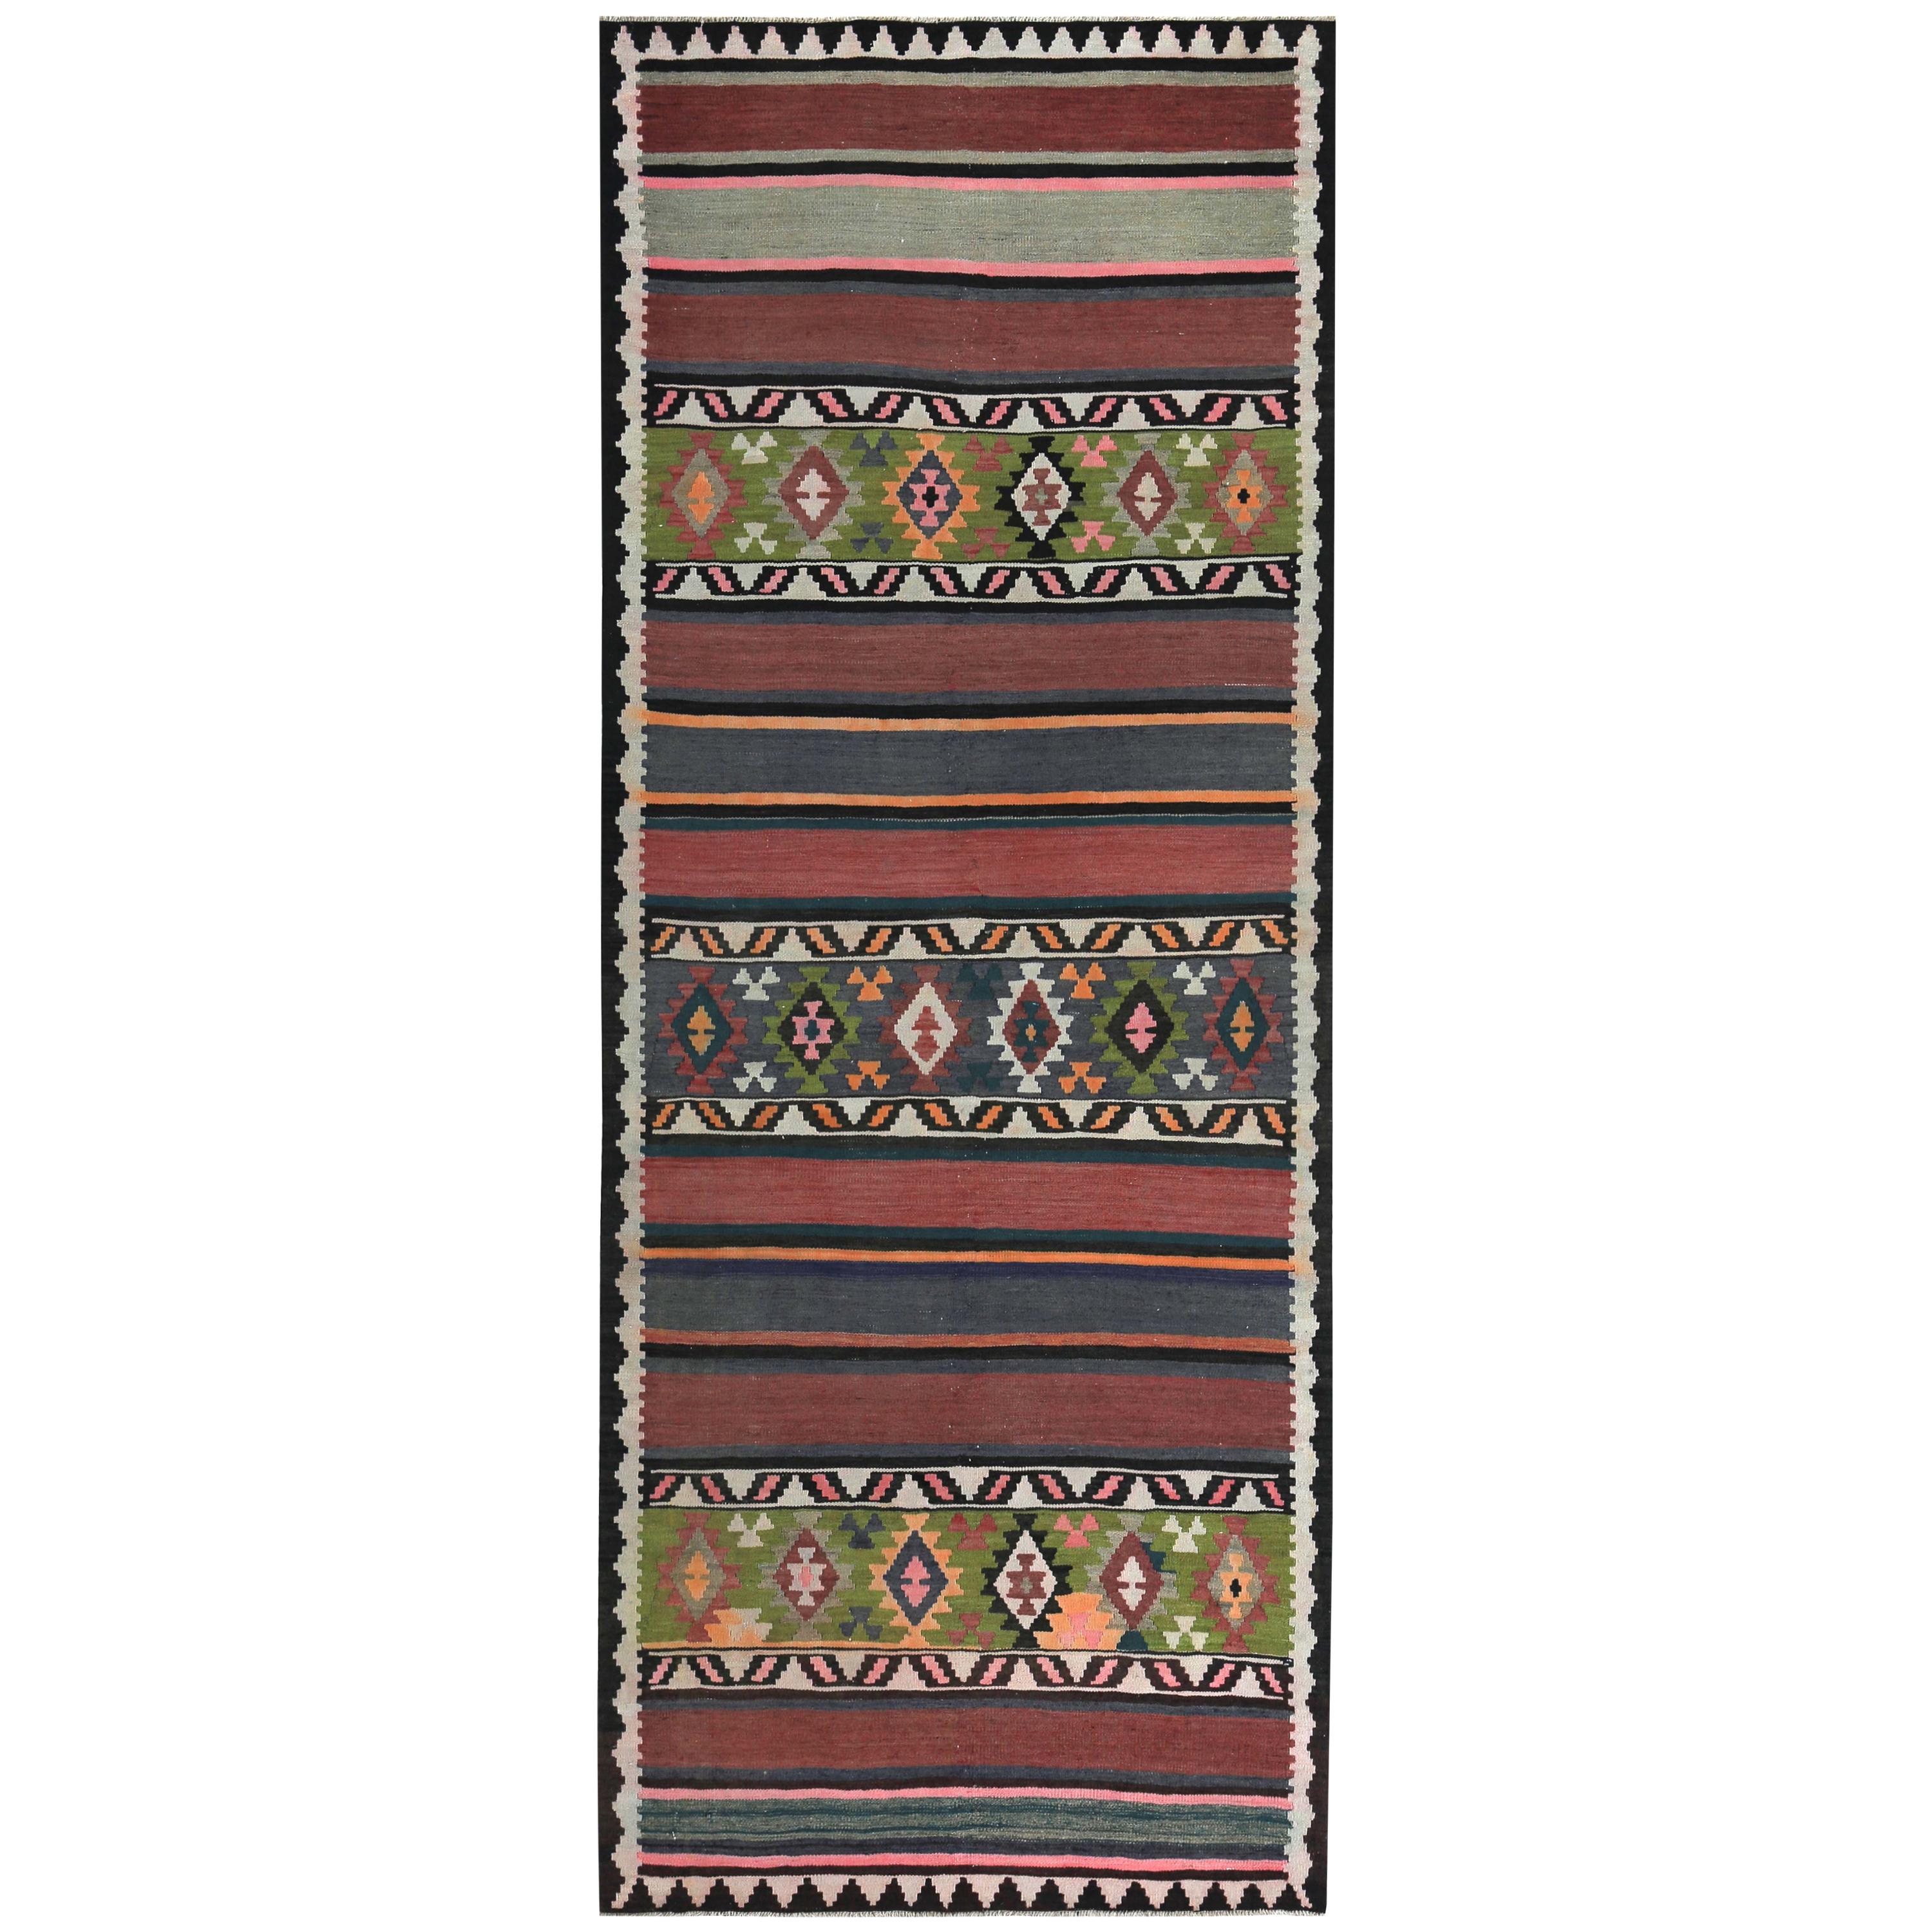 Turkish Kilim Runner Rug with Red, Gray Stripes and Green Diamond Pattern